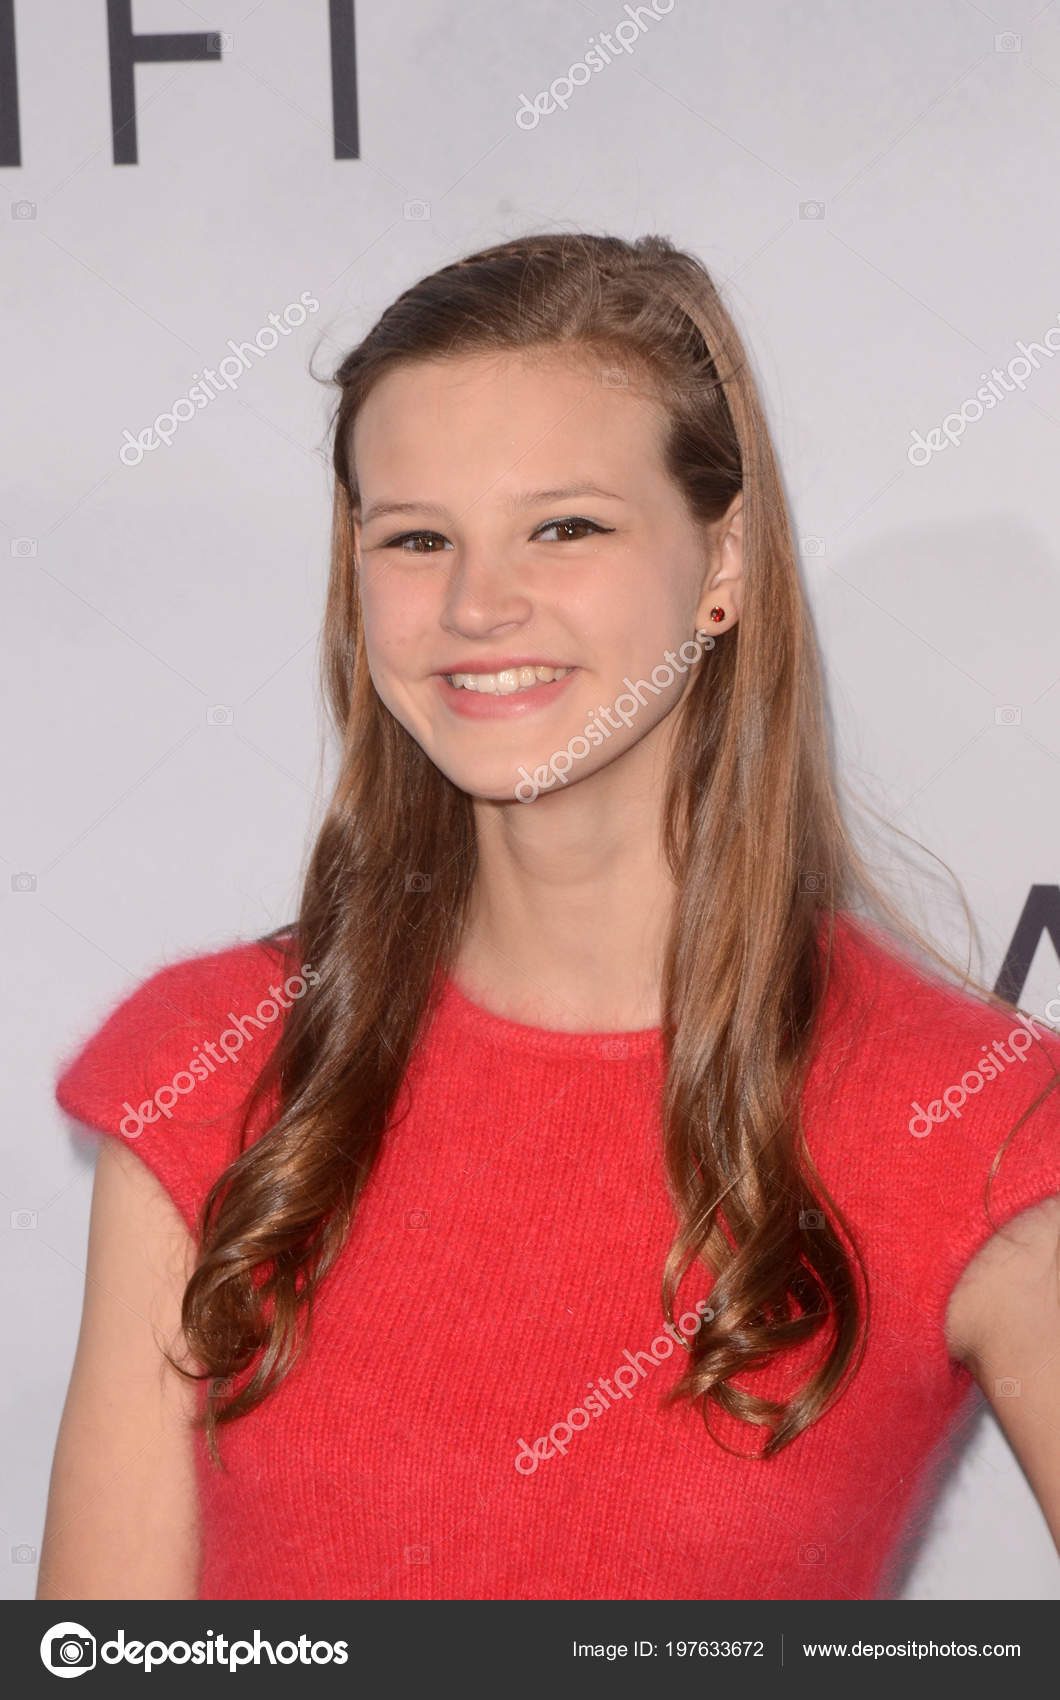 30 Pictures Of Peyton Kennedy Irama Gallery - Bank2home.com